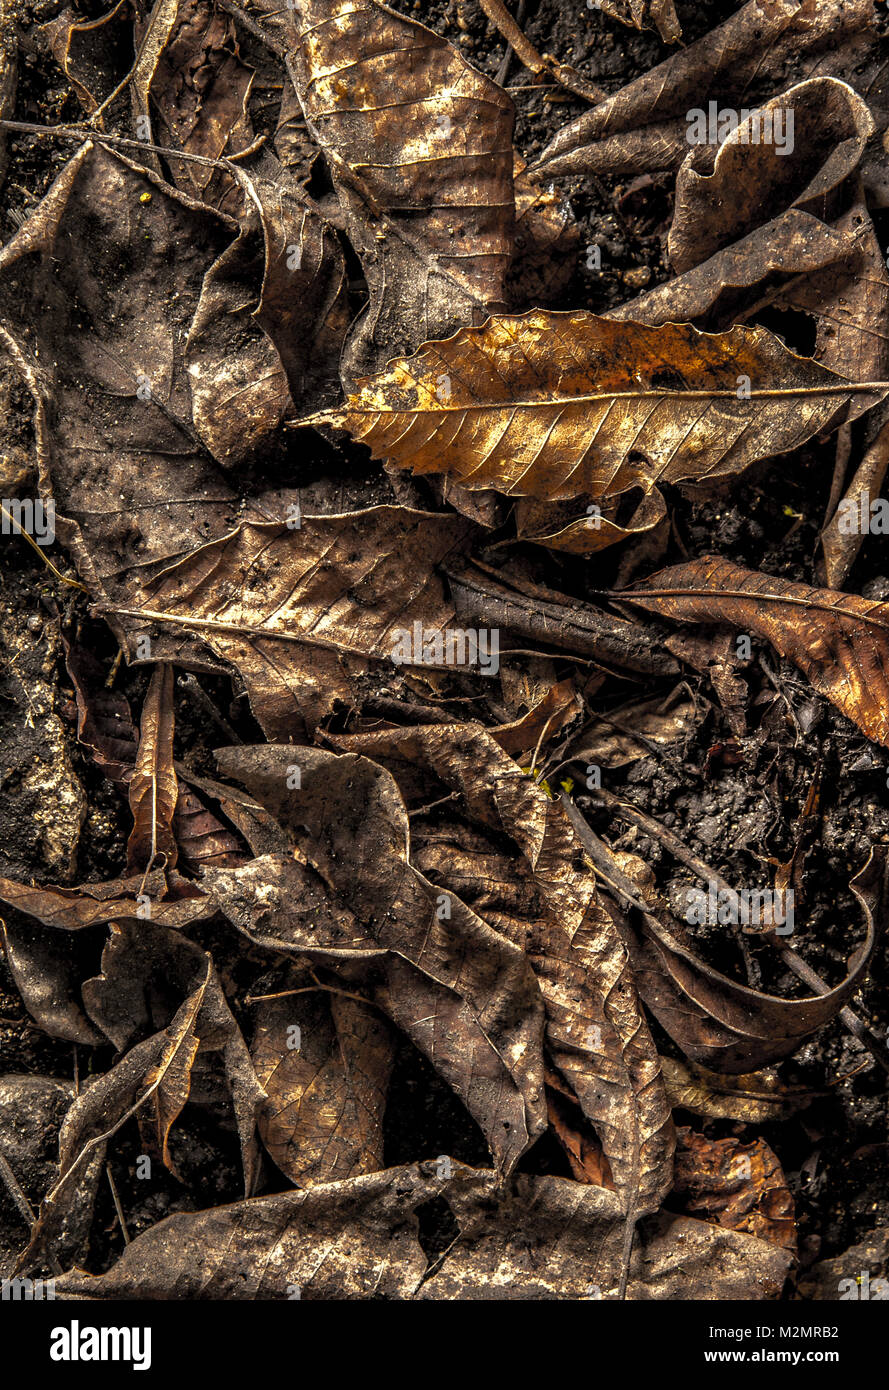 Dried leaves texture Stock Photo - Alamy